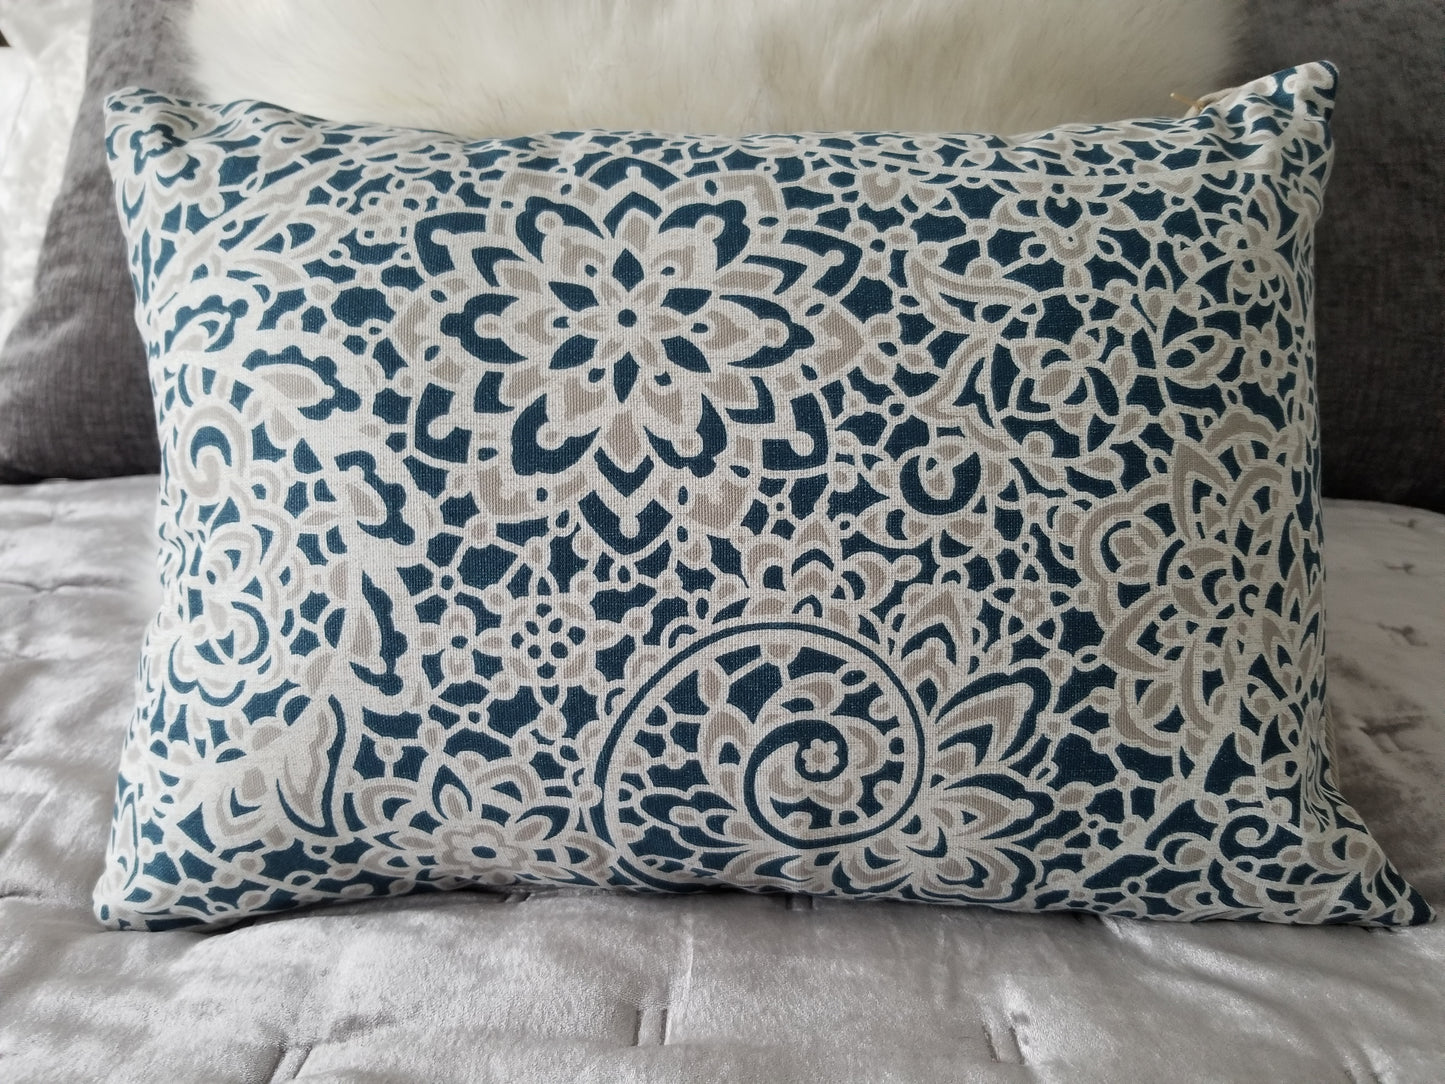 Lacy Print Accent Cushion